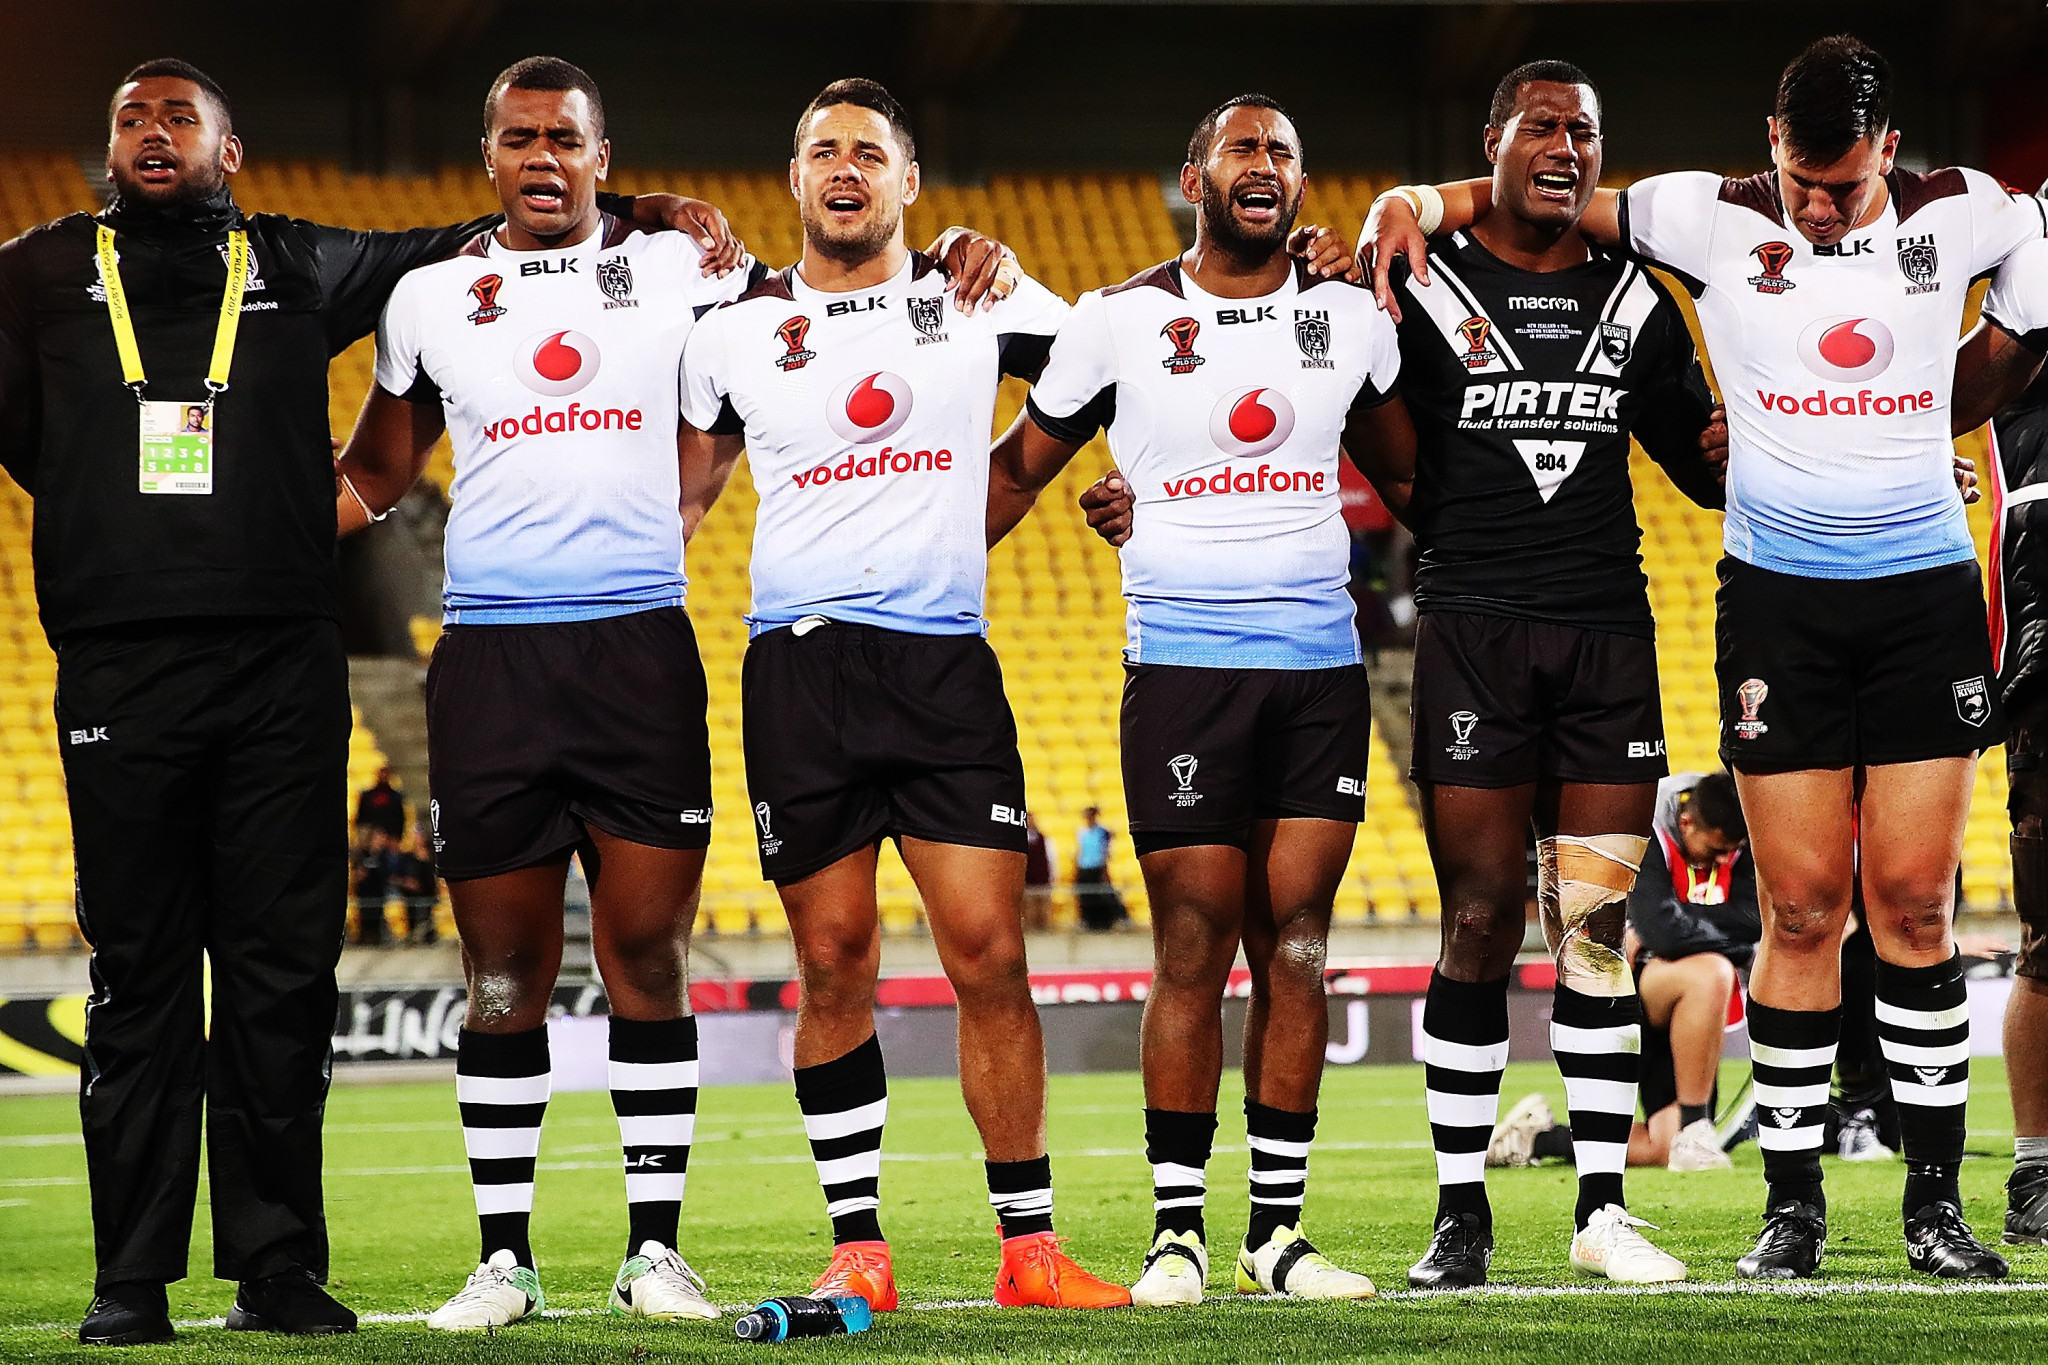 Fiji have secured their progression through to the semi-finals of the Rugby League World Cup ©Getty Images